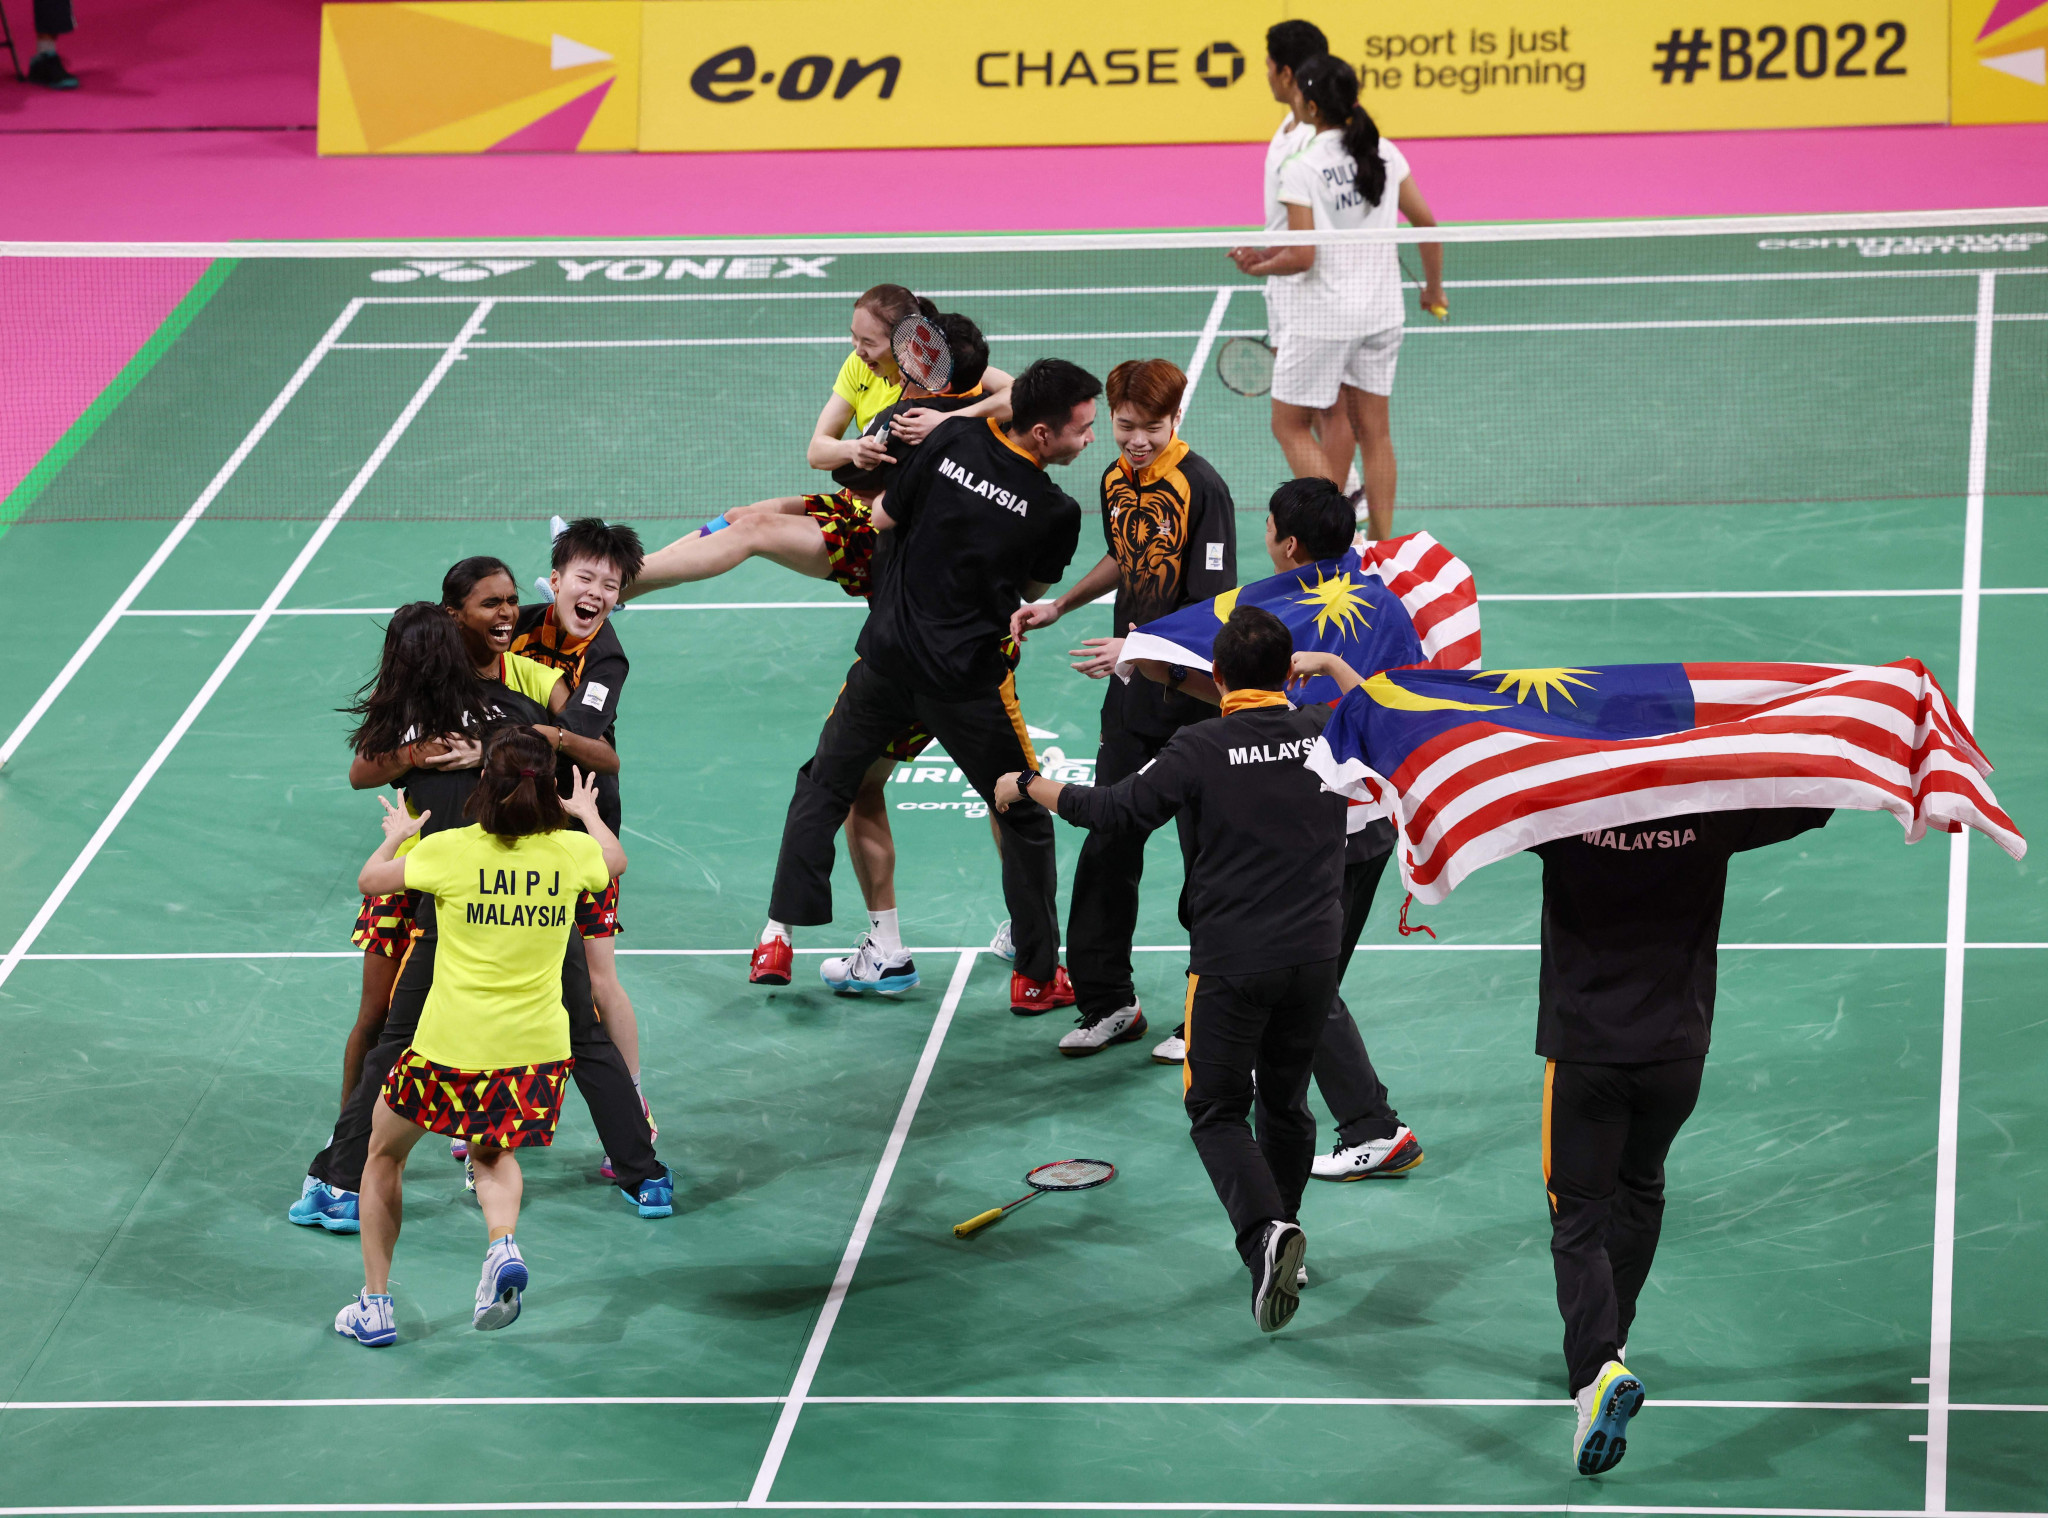 Malaysia reclaim mixed team badminton title from India at Birmingham 2022